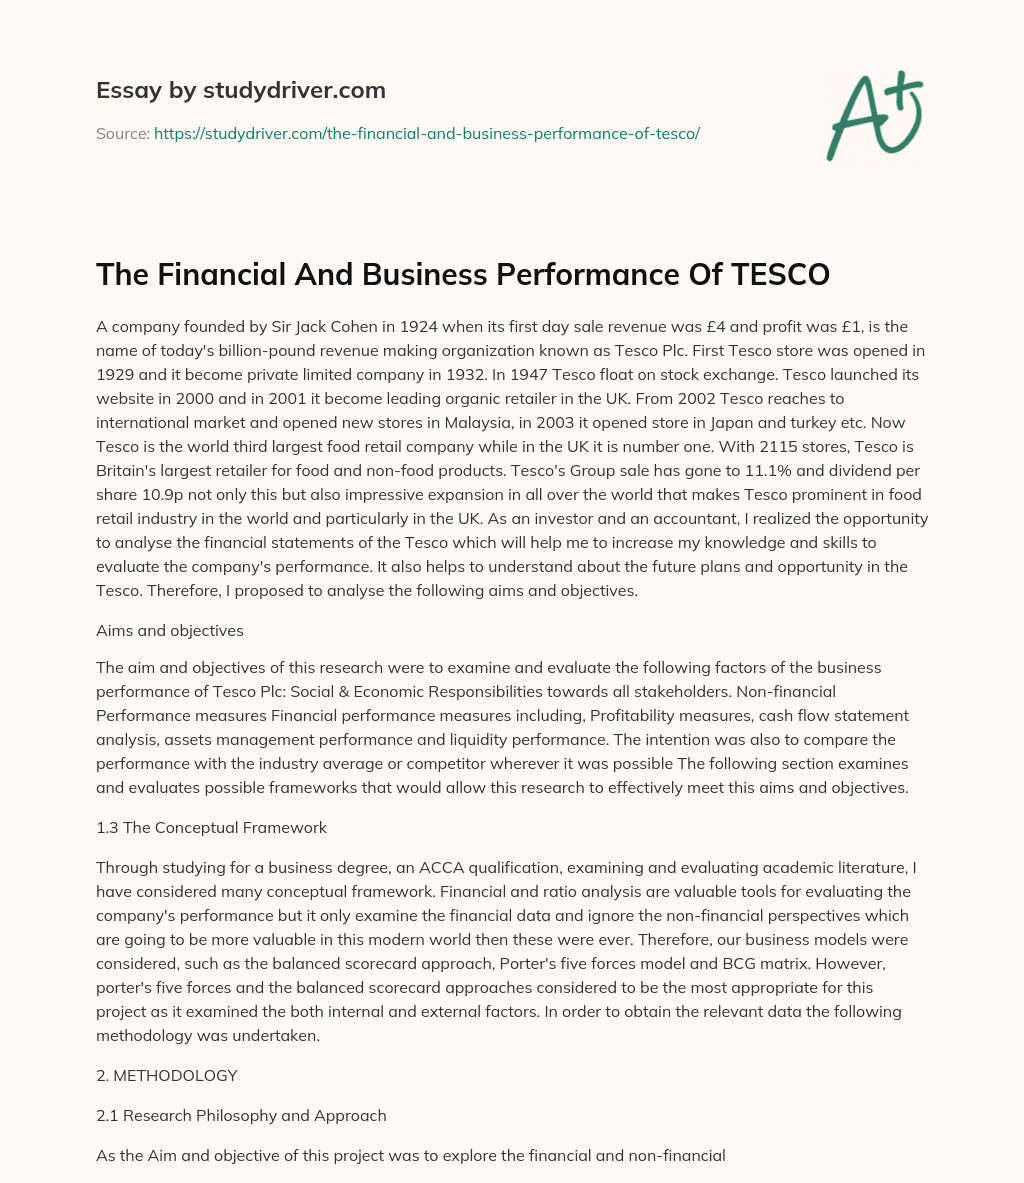 The Financial and Business Performance of TESCO essay